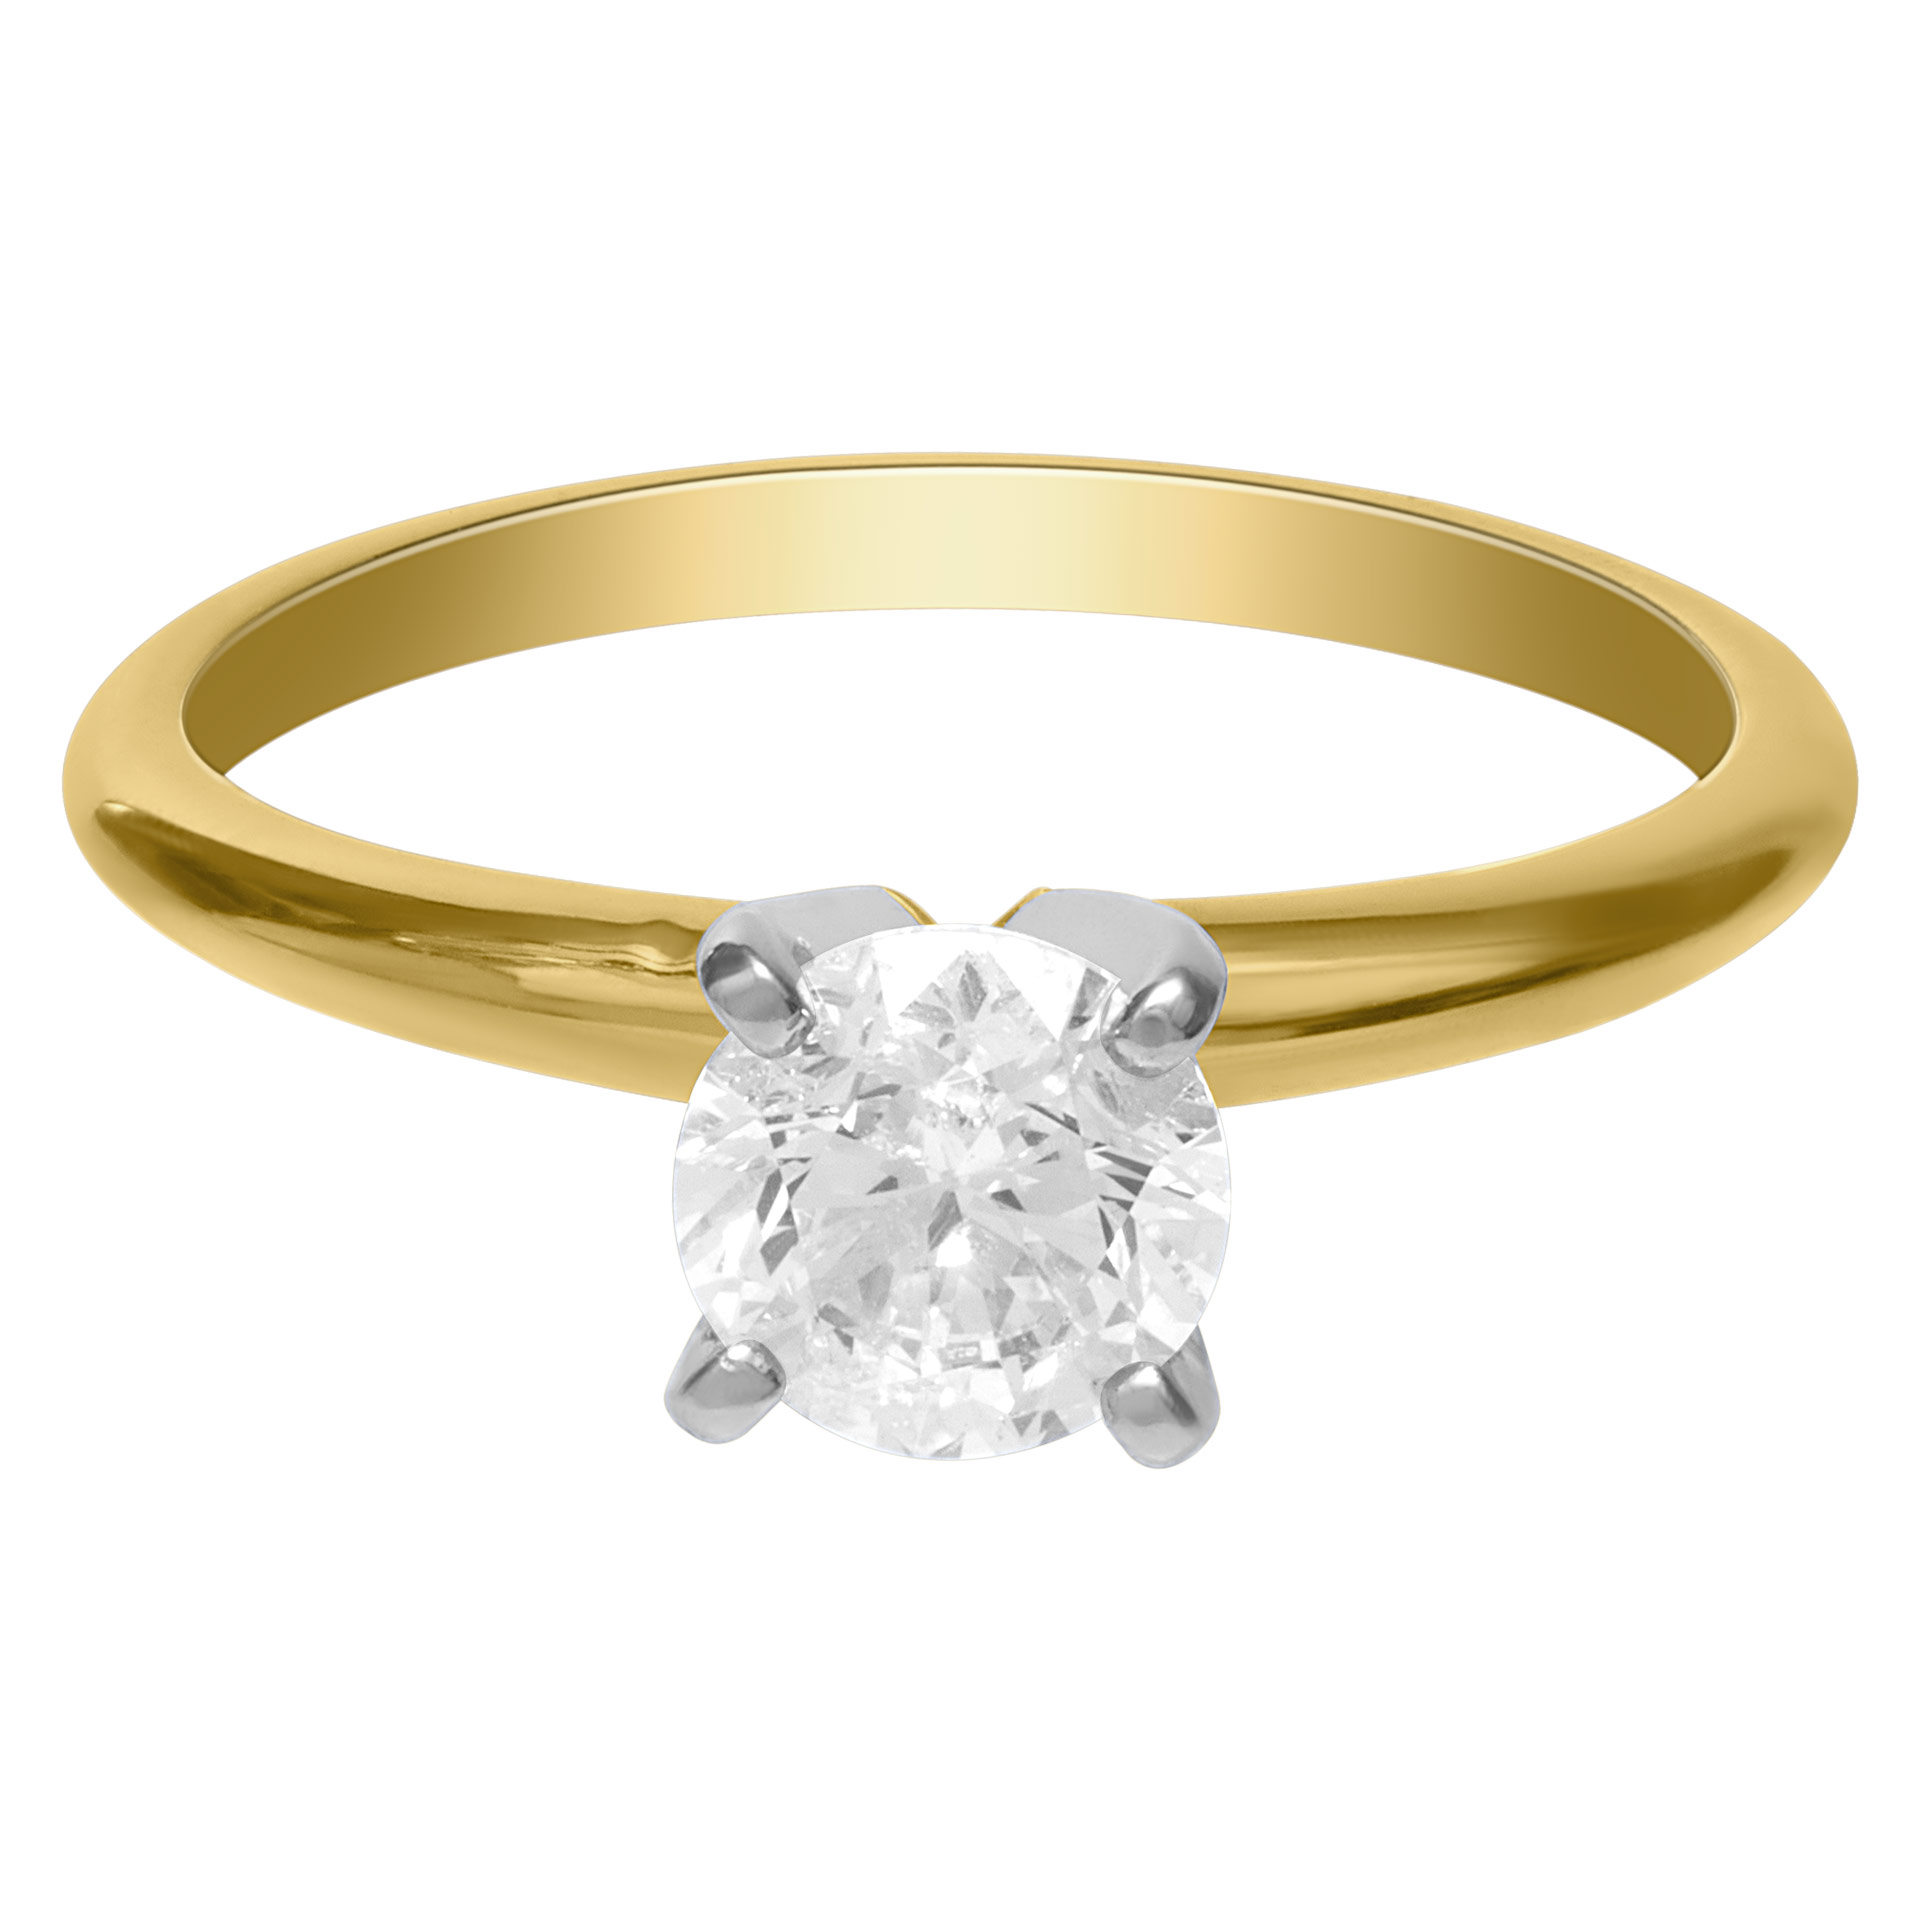 GIA certified 0.96cts diamond ring in 14k gold setting